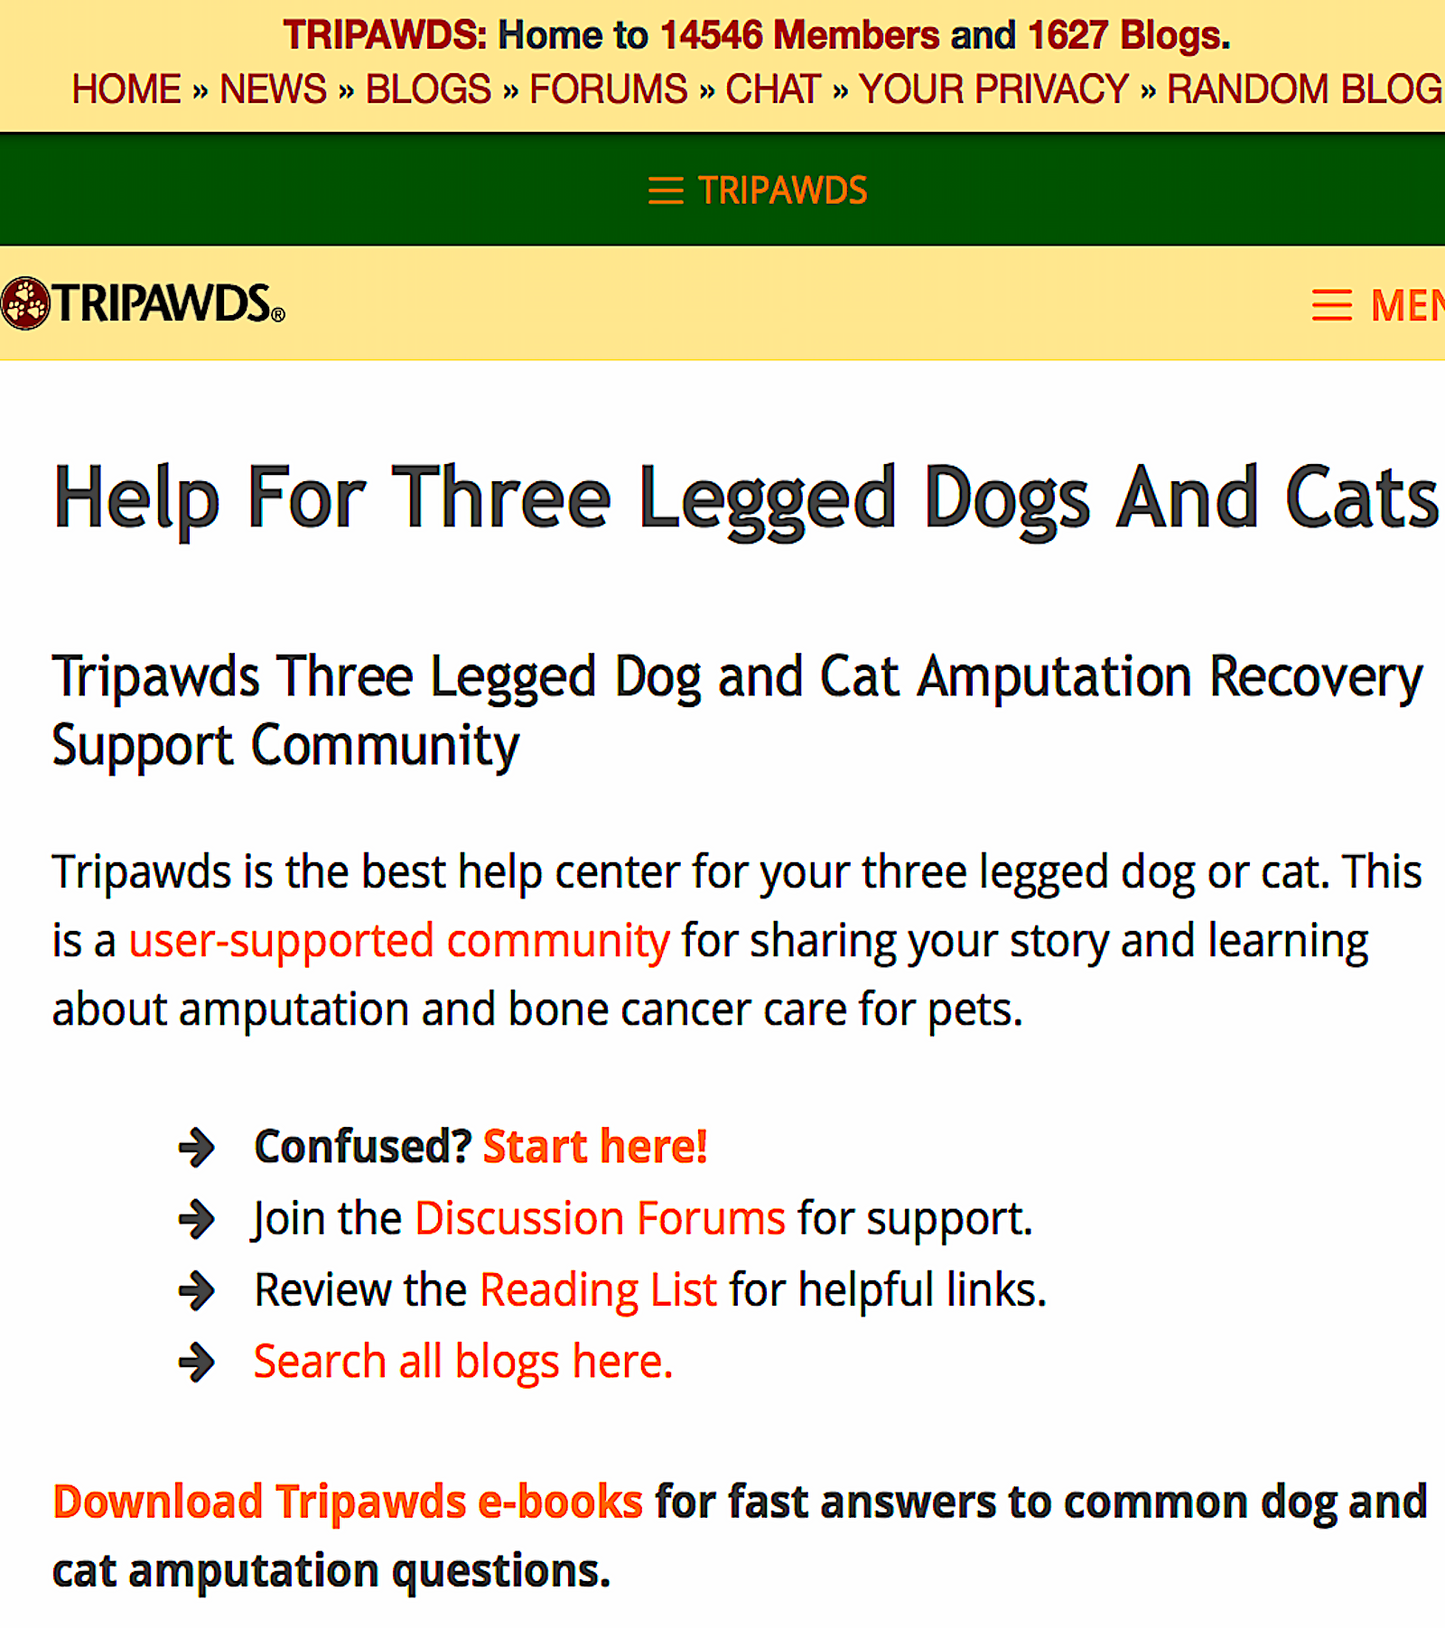 TRIPAWDS: resource for parents of 3-legged dogs and cats - Vital Vet